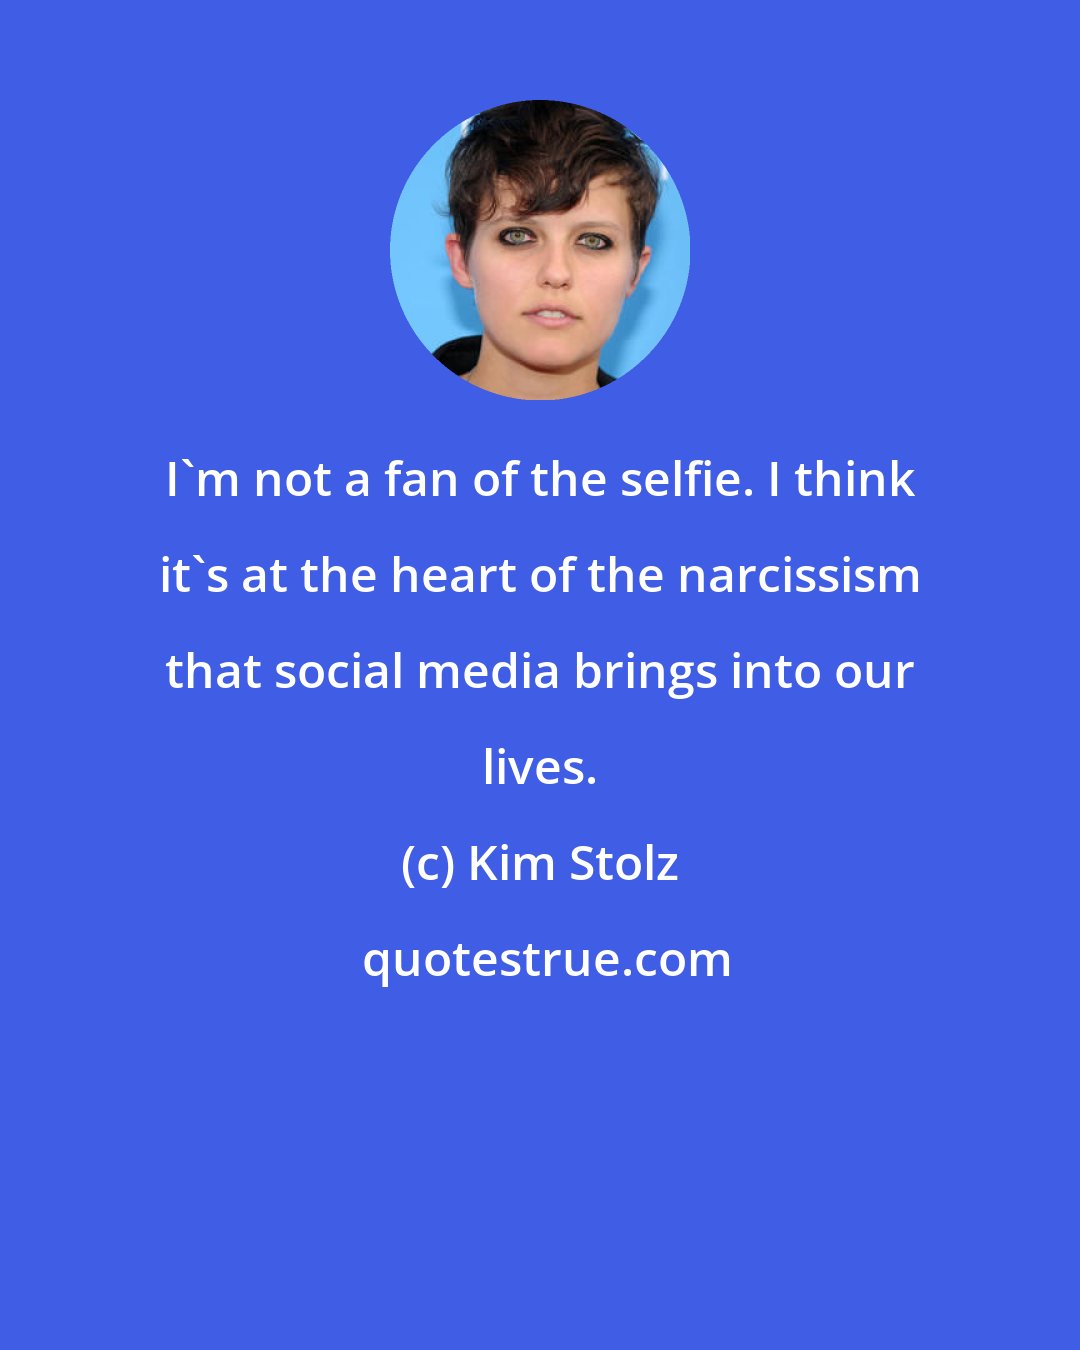 Kim Stolz: I'm not a fan of the selfie. I think it's at the heart of the narcissism that social media brings into our lives.